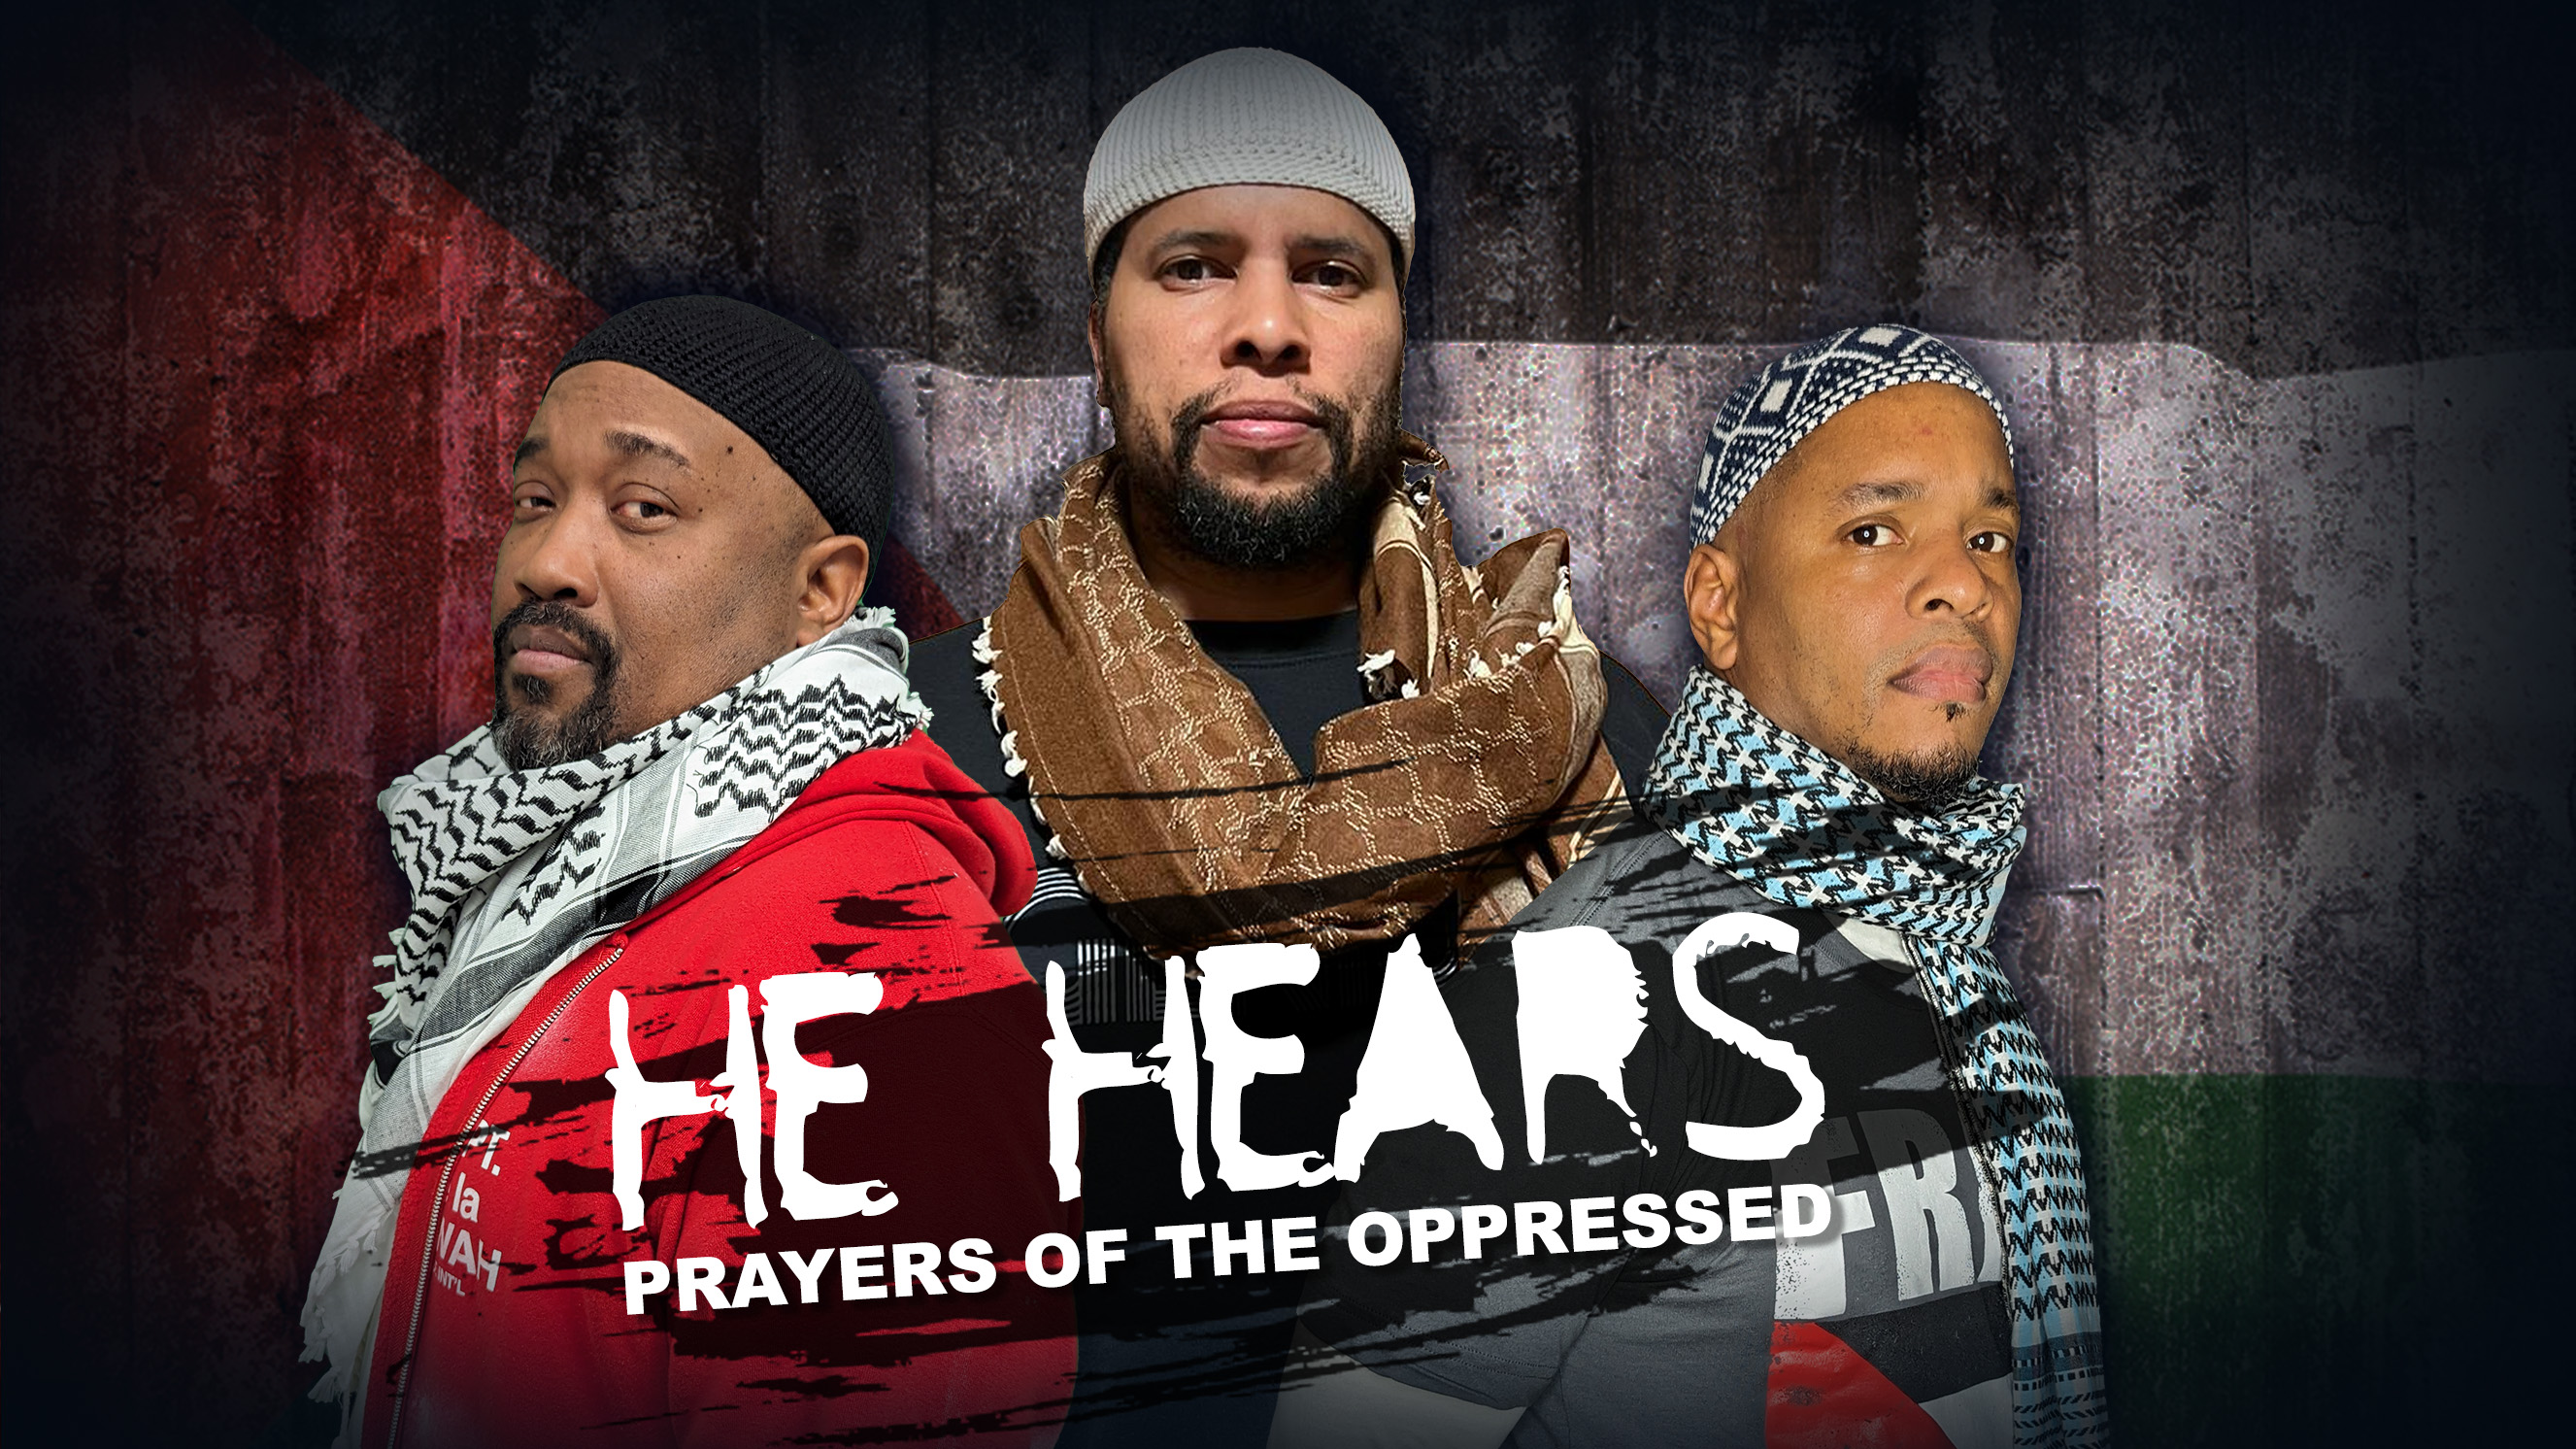 He Hears – Prayers of the Oppressed (Native Deen Official Lyric Video)